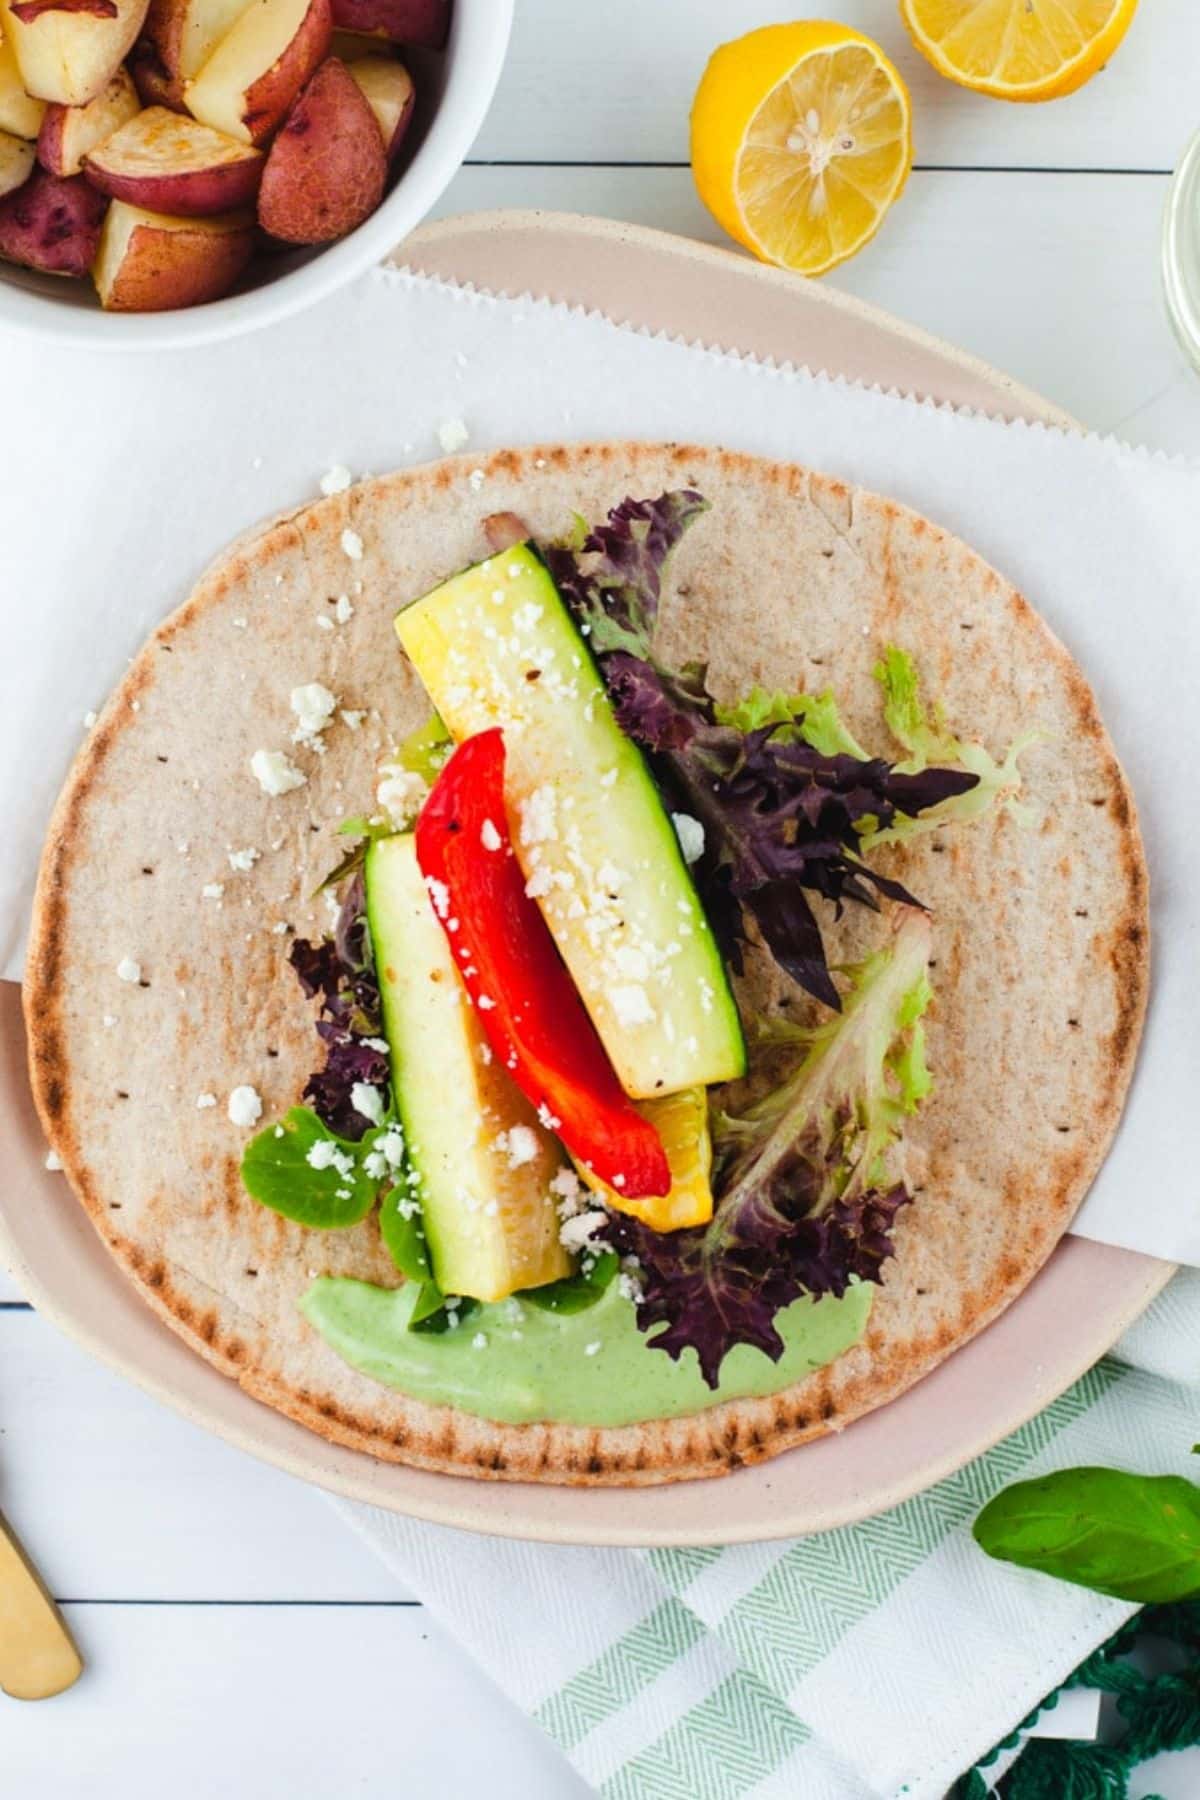 Whole wheat pita topped with romaine lettuce, green aioli, and roasted vegetables.